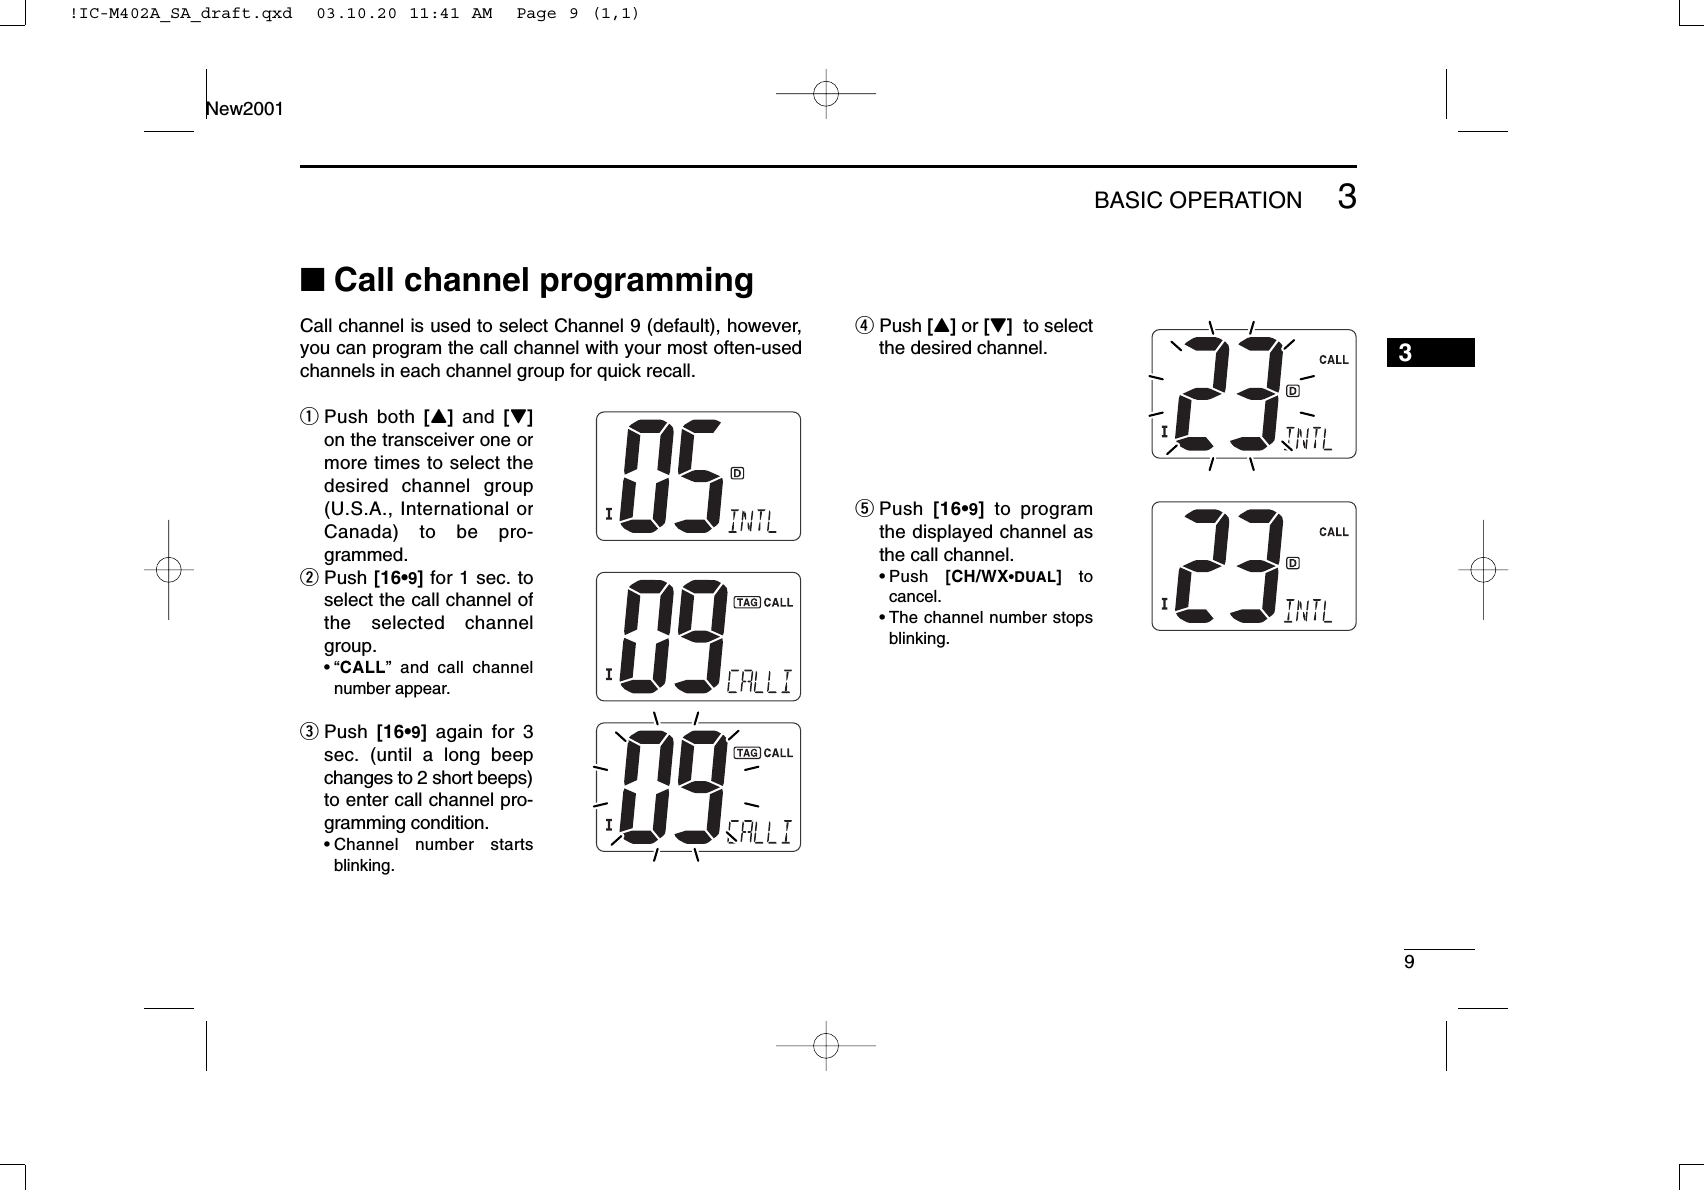 93BASIC OPERATIONNew2001■Call channel programmingCall channel is used to select Channel 9 (default), however,you can program the call channel with your most often-usedchannels in each channel group for quick recall.qPush both [Y]and  [Z]on the transceiver one ormore times to select thedesired channel group(U.S.A., International orCanada) to be pro-grammed.wPush [16•9]for 1 sec. toselect the call channel ofthe selected channelgroup.•“CALL” and call channelnumber appear.ePush  [16•9]again for 3sec. (until a long beepchanges to 2 short beeps)to enter call channel pro-gramming condition.•Channel number startsblinking.rPush [Y]or [Z]to selectthe desired channel.tPush  [16•9]to programthe displayed channel asthe call channel.•Push  [CH/WX•DUAL]tocancel.•The channel number stopsblinking.3!IC-M402A_SA_draft.qxd  03.10.20 11:41 AM  Page 9 (1,1)